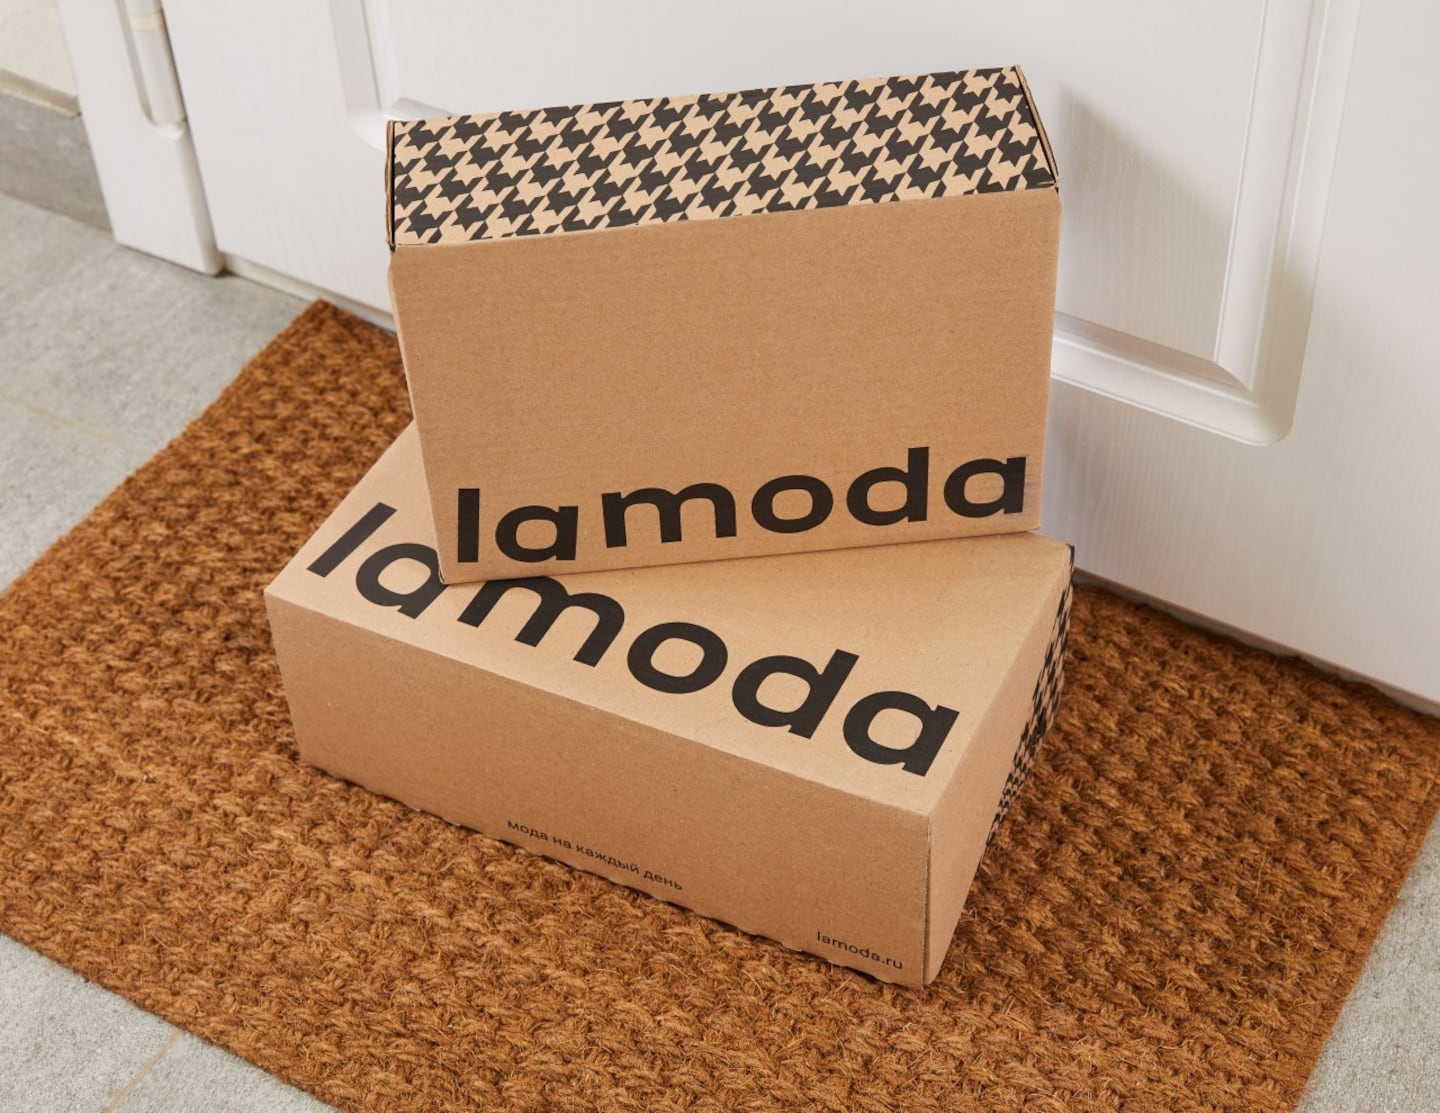 Lamoda saw particularly strong growth for premium items. Lamoda.